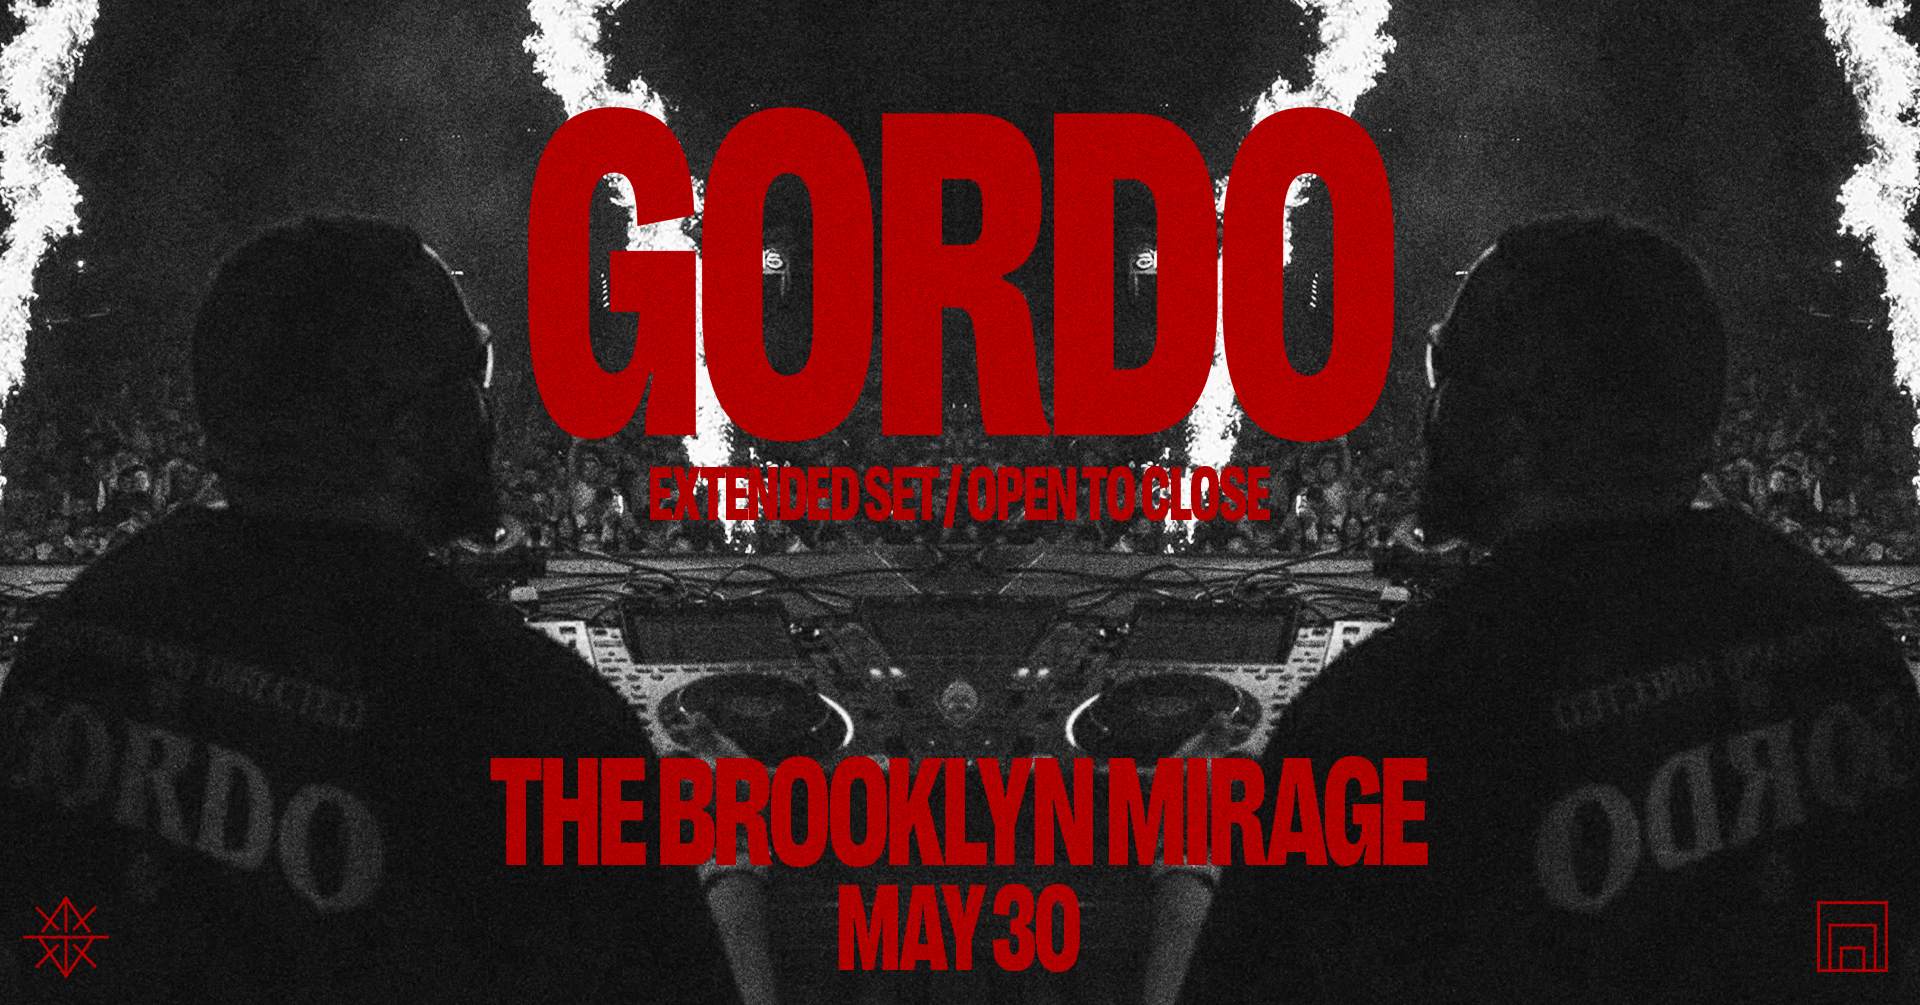 GORDO NYC - EXTENDED SET/OPEN TO CLOSE - Página frontal